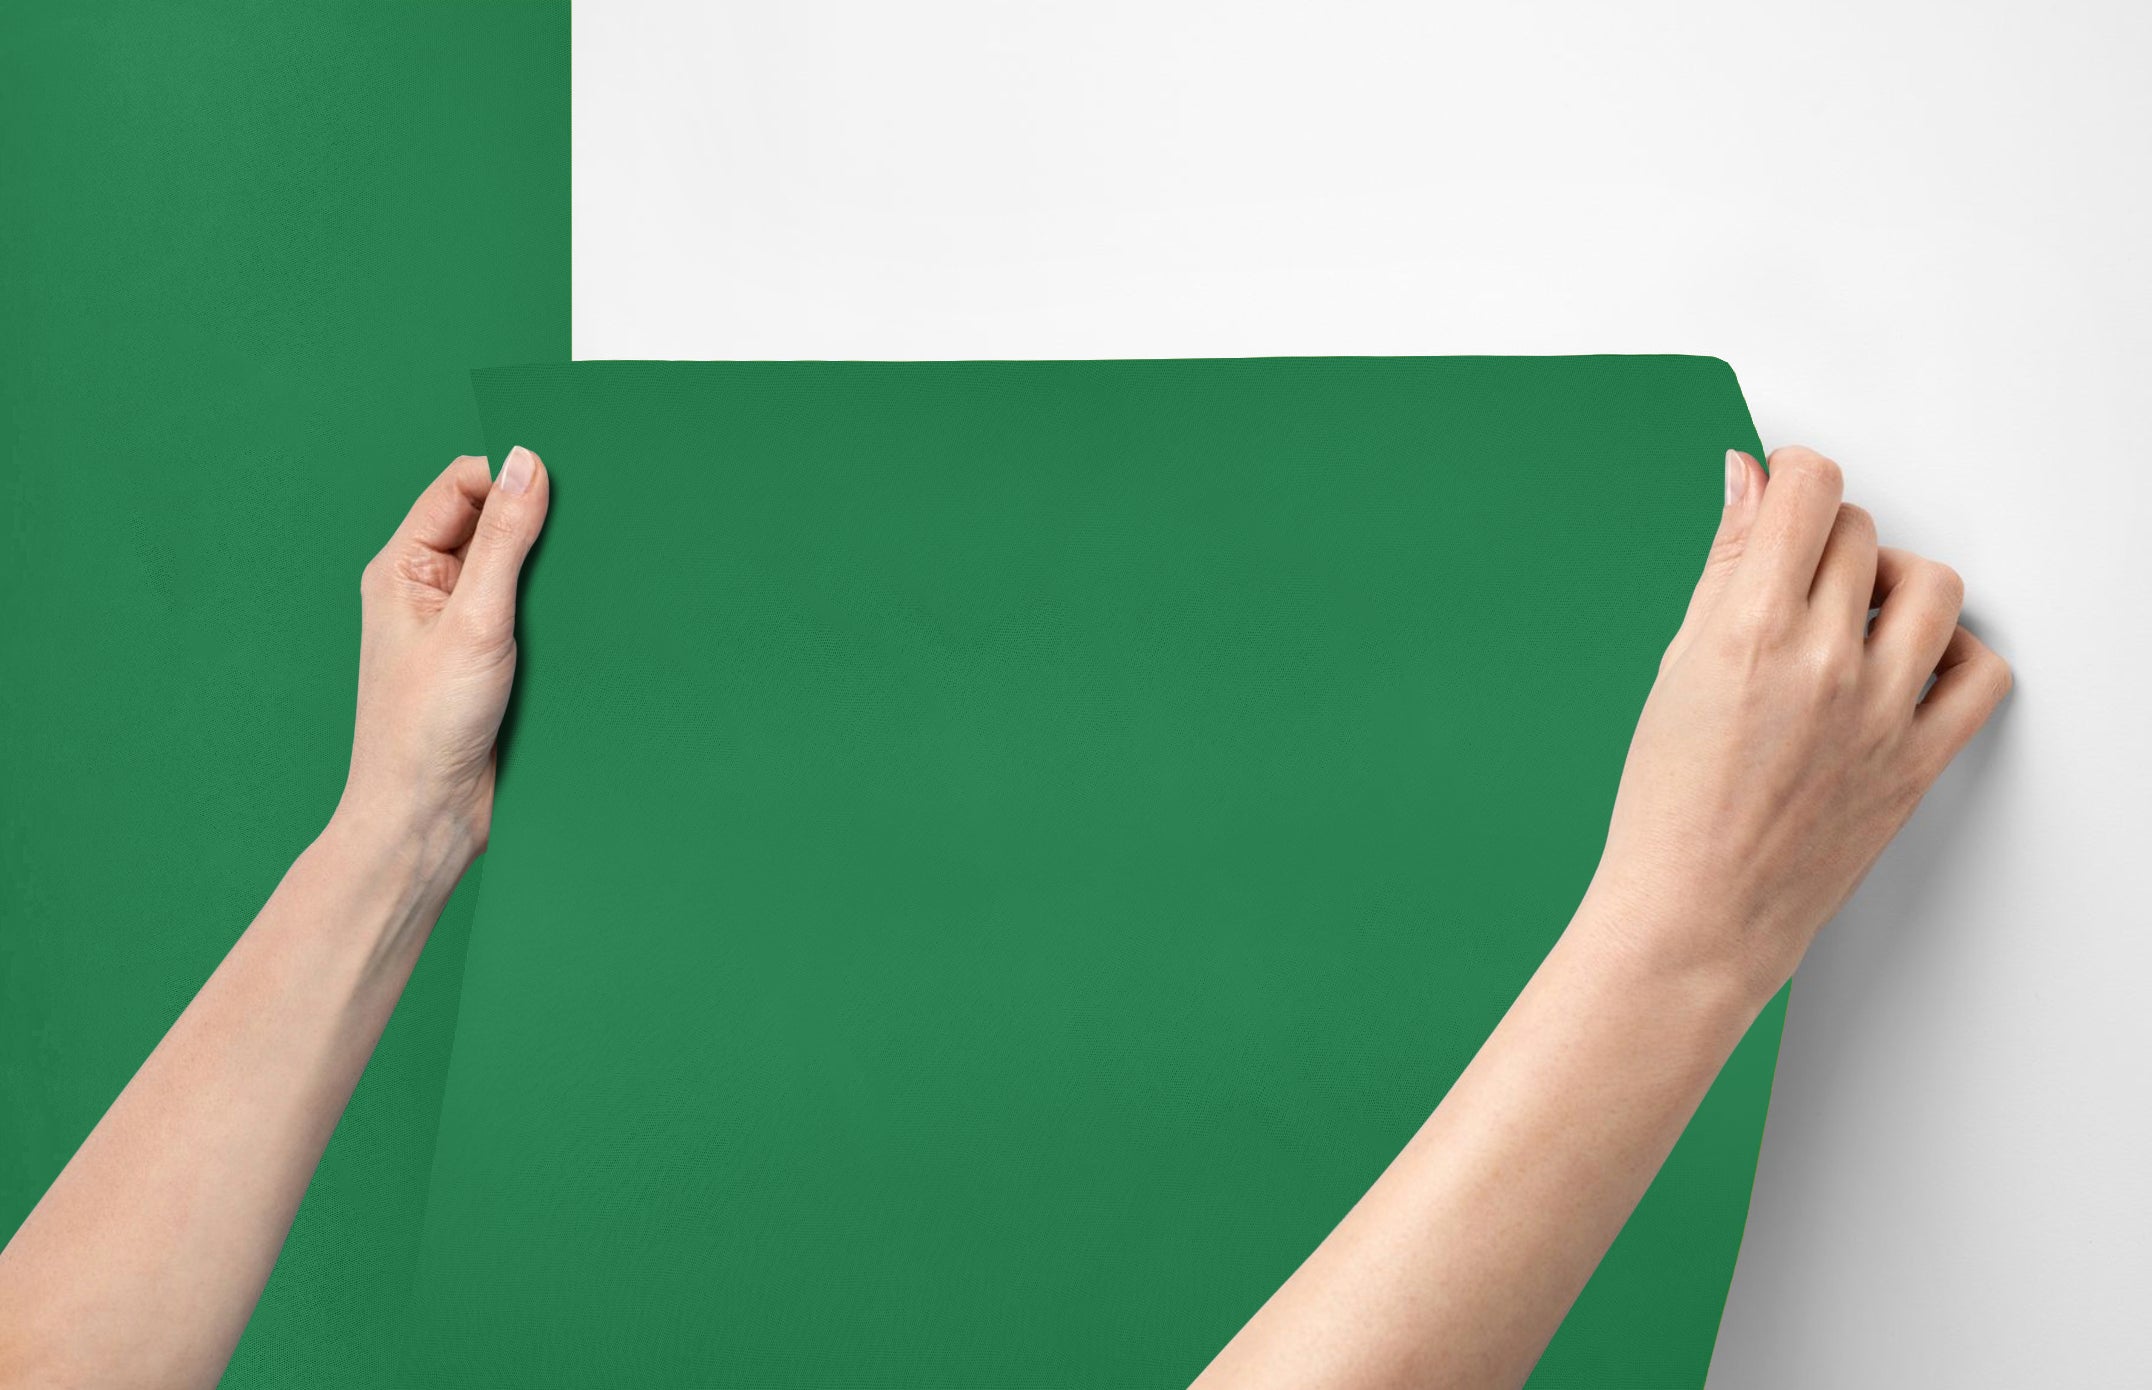 Peel & Stick Removable Re-usable Paint - Color RAL 6032 Signal Green - offRAL™ - RALRAW LLC, USA